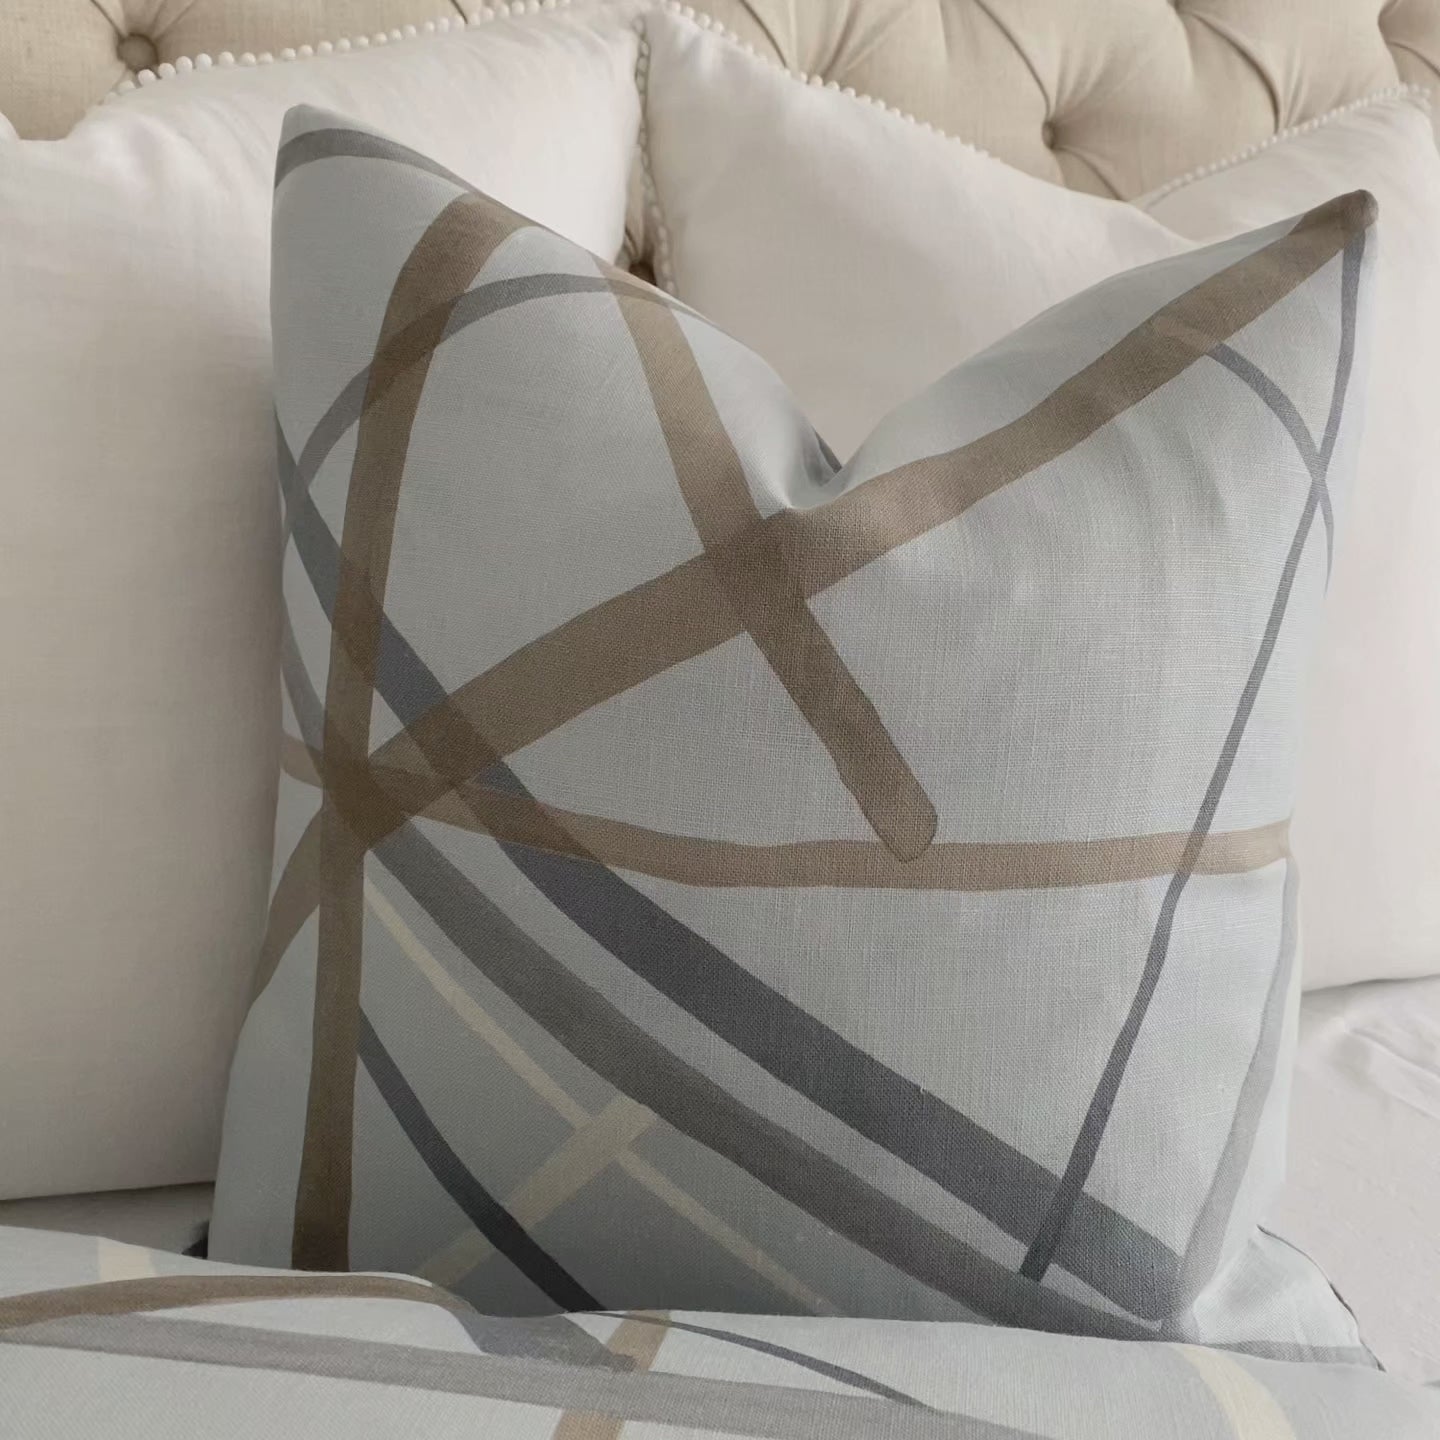 Kelly Wearstler Simpatico Cinder Light Blue Striped Designer Decorative Throw Pillow Cover Product Video